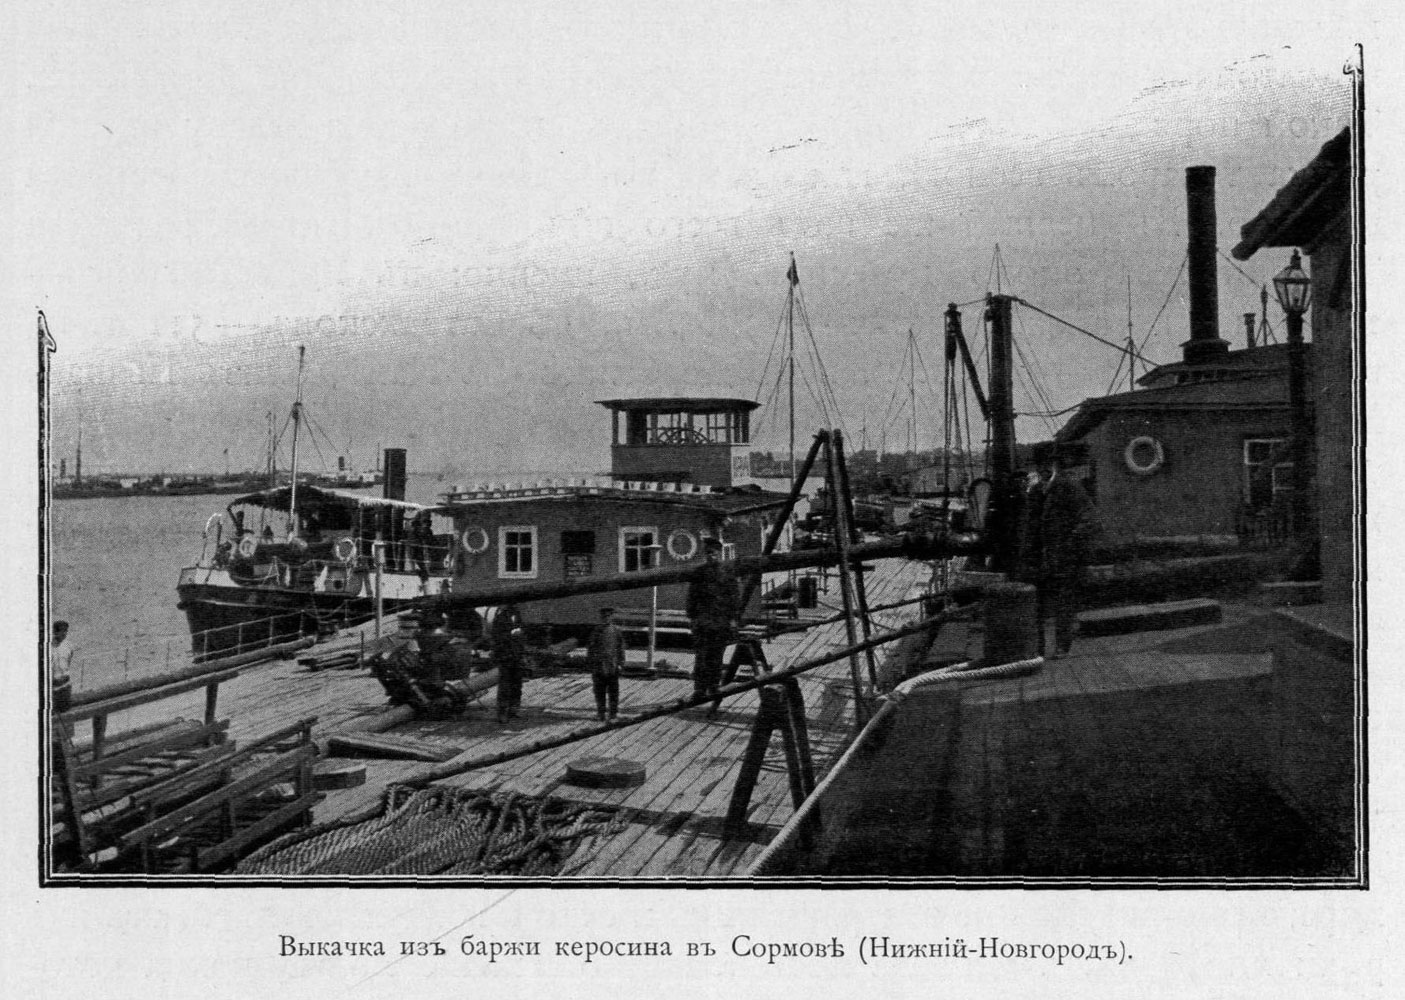 Pumping of paraffin from the river barge near Nizhniy Novgorod in the beginning of 20th century.